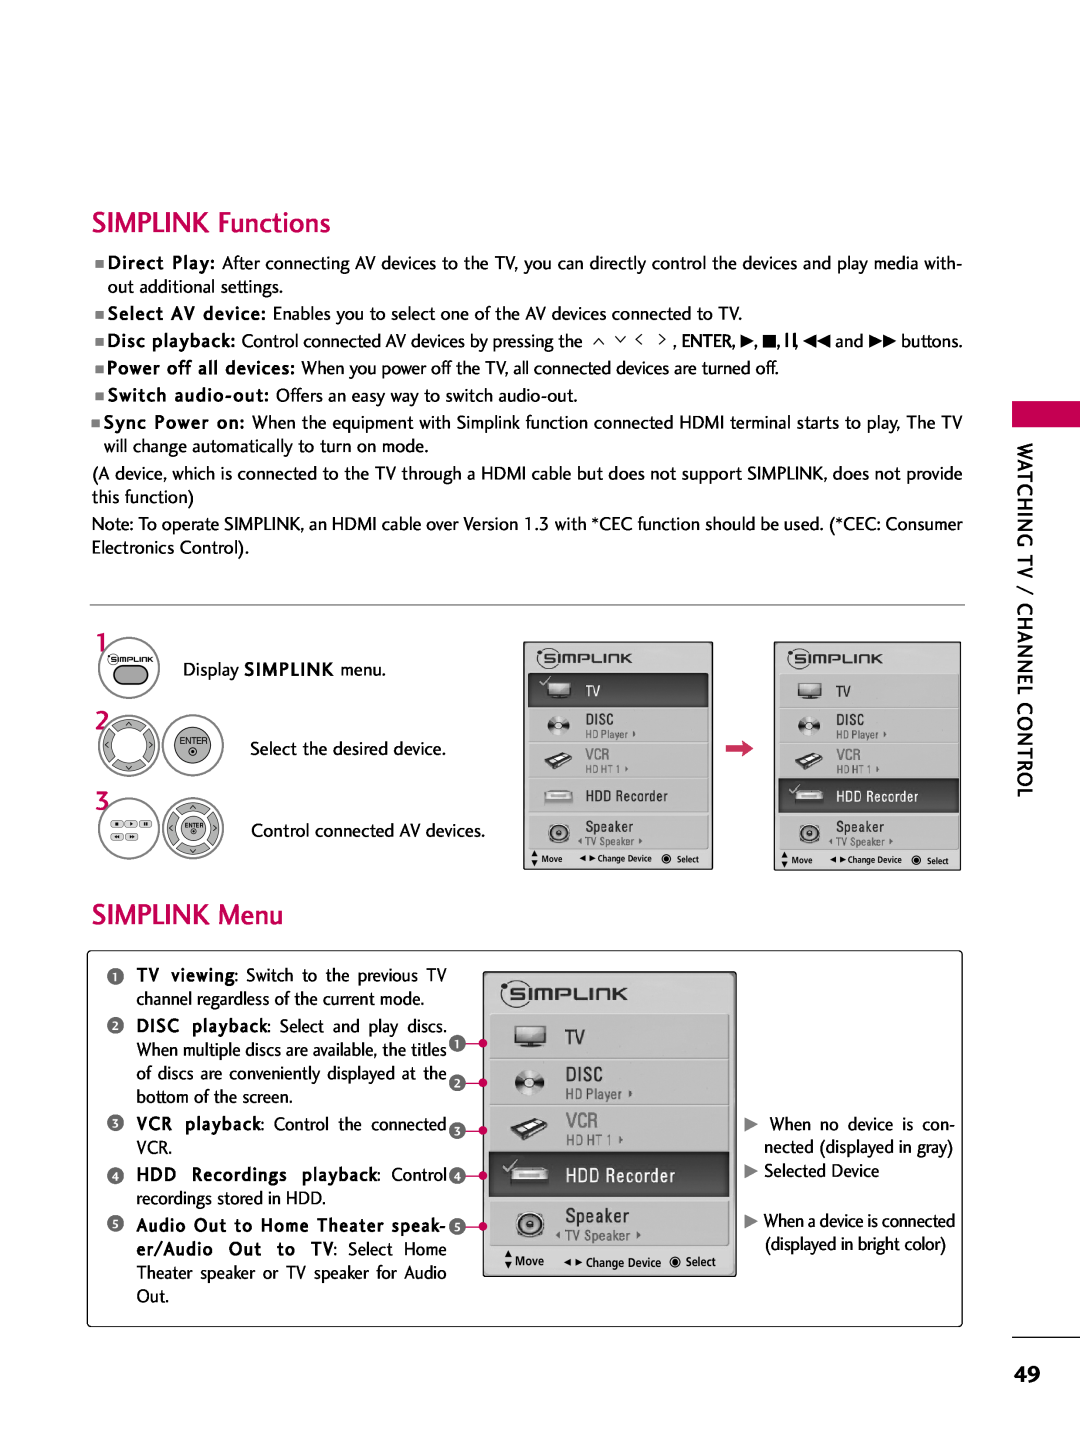 LG Electronics 50PQ12, 42PQ12 owner manual SIMPLINK Functions, SIMPLINK Menu, ENTER, G, A, l l, FF and GG buttons 